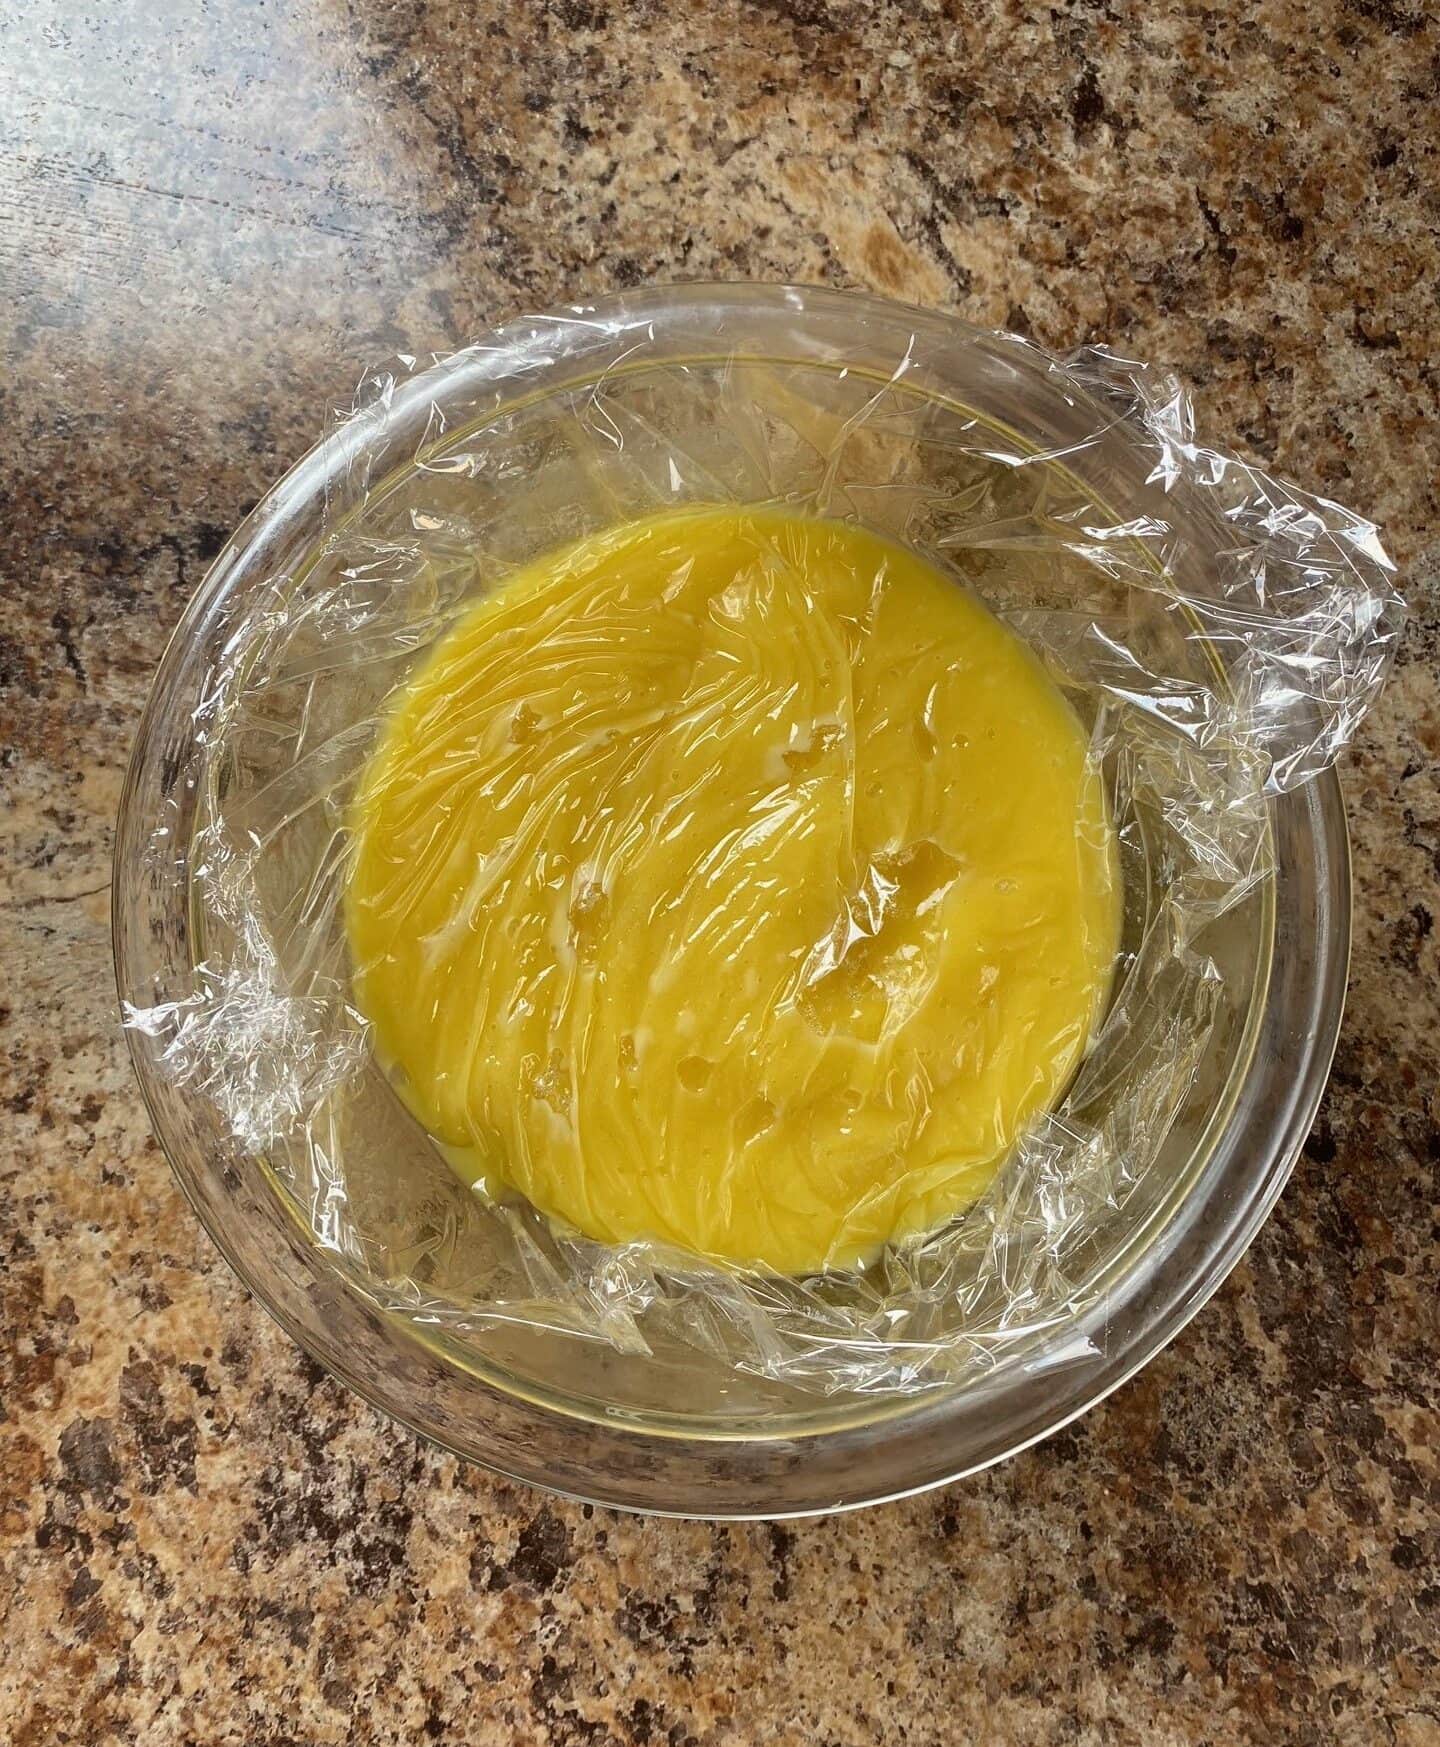 Lemon curd in a small clear bowl. Plastic wrap is placed directly on the lemon curd.